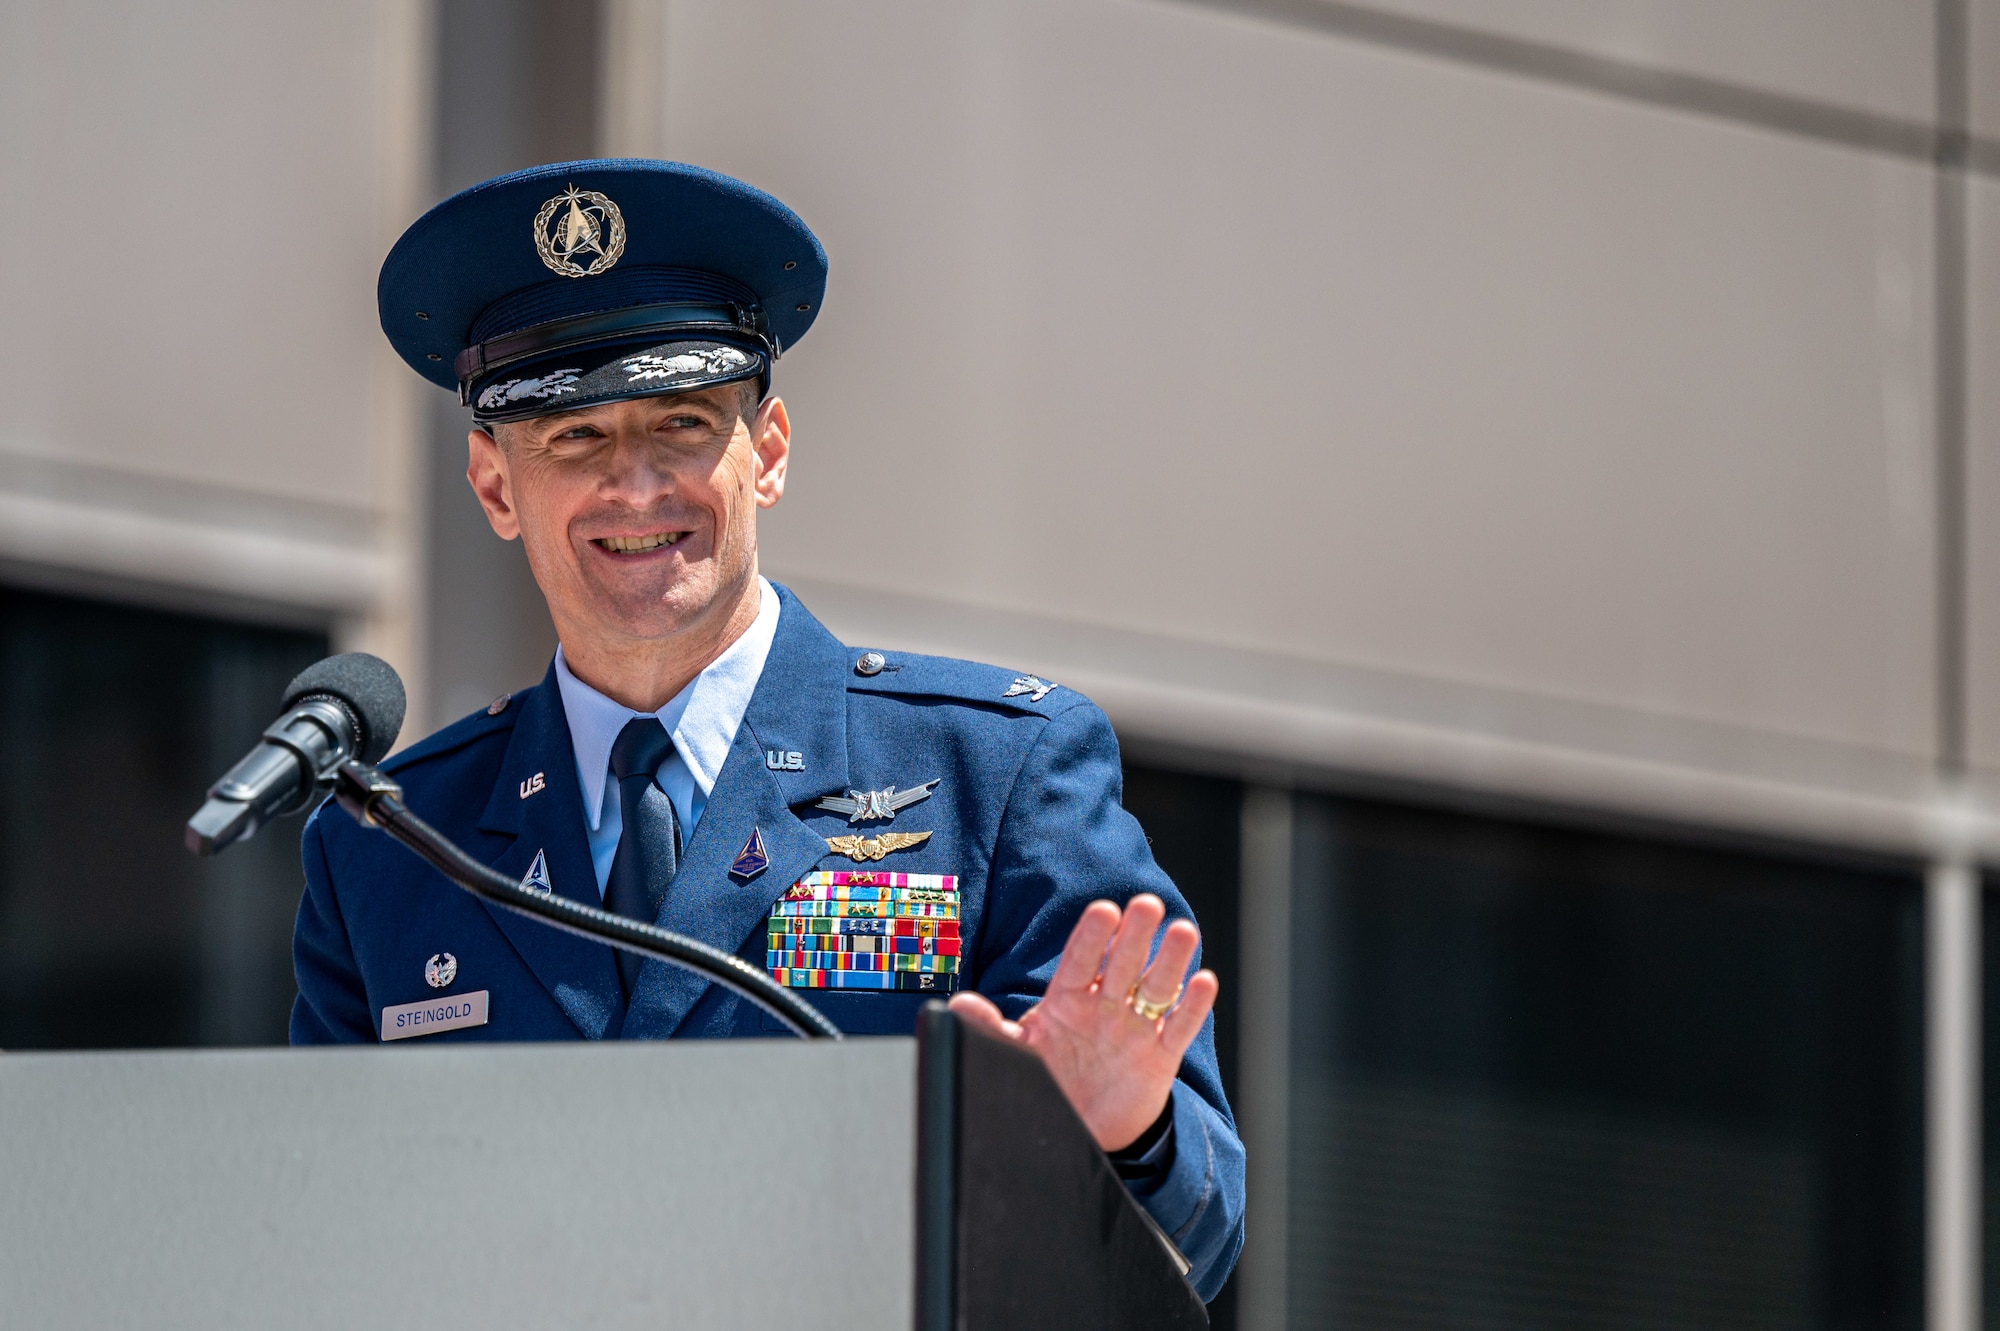 U.S. Space Force Col. Jay Steingold, the Delta 11 incoming commander, delivers remarks during Delta 11’s change of command ceremony at Schriever Space Force Base, Colorado, July 7, 2023. Delta 11 is responsible for delivering realistic, threat-informed test and training resources to U.S. Space Force, joint, and coalition space operators via live, virtual, and constructive threat replication, leveraging the National Space Test and Training Complex across multiple space warfighting disciplines. (U.S. Space Force photo by Ethan Johnson)